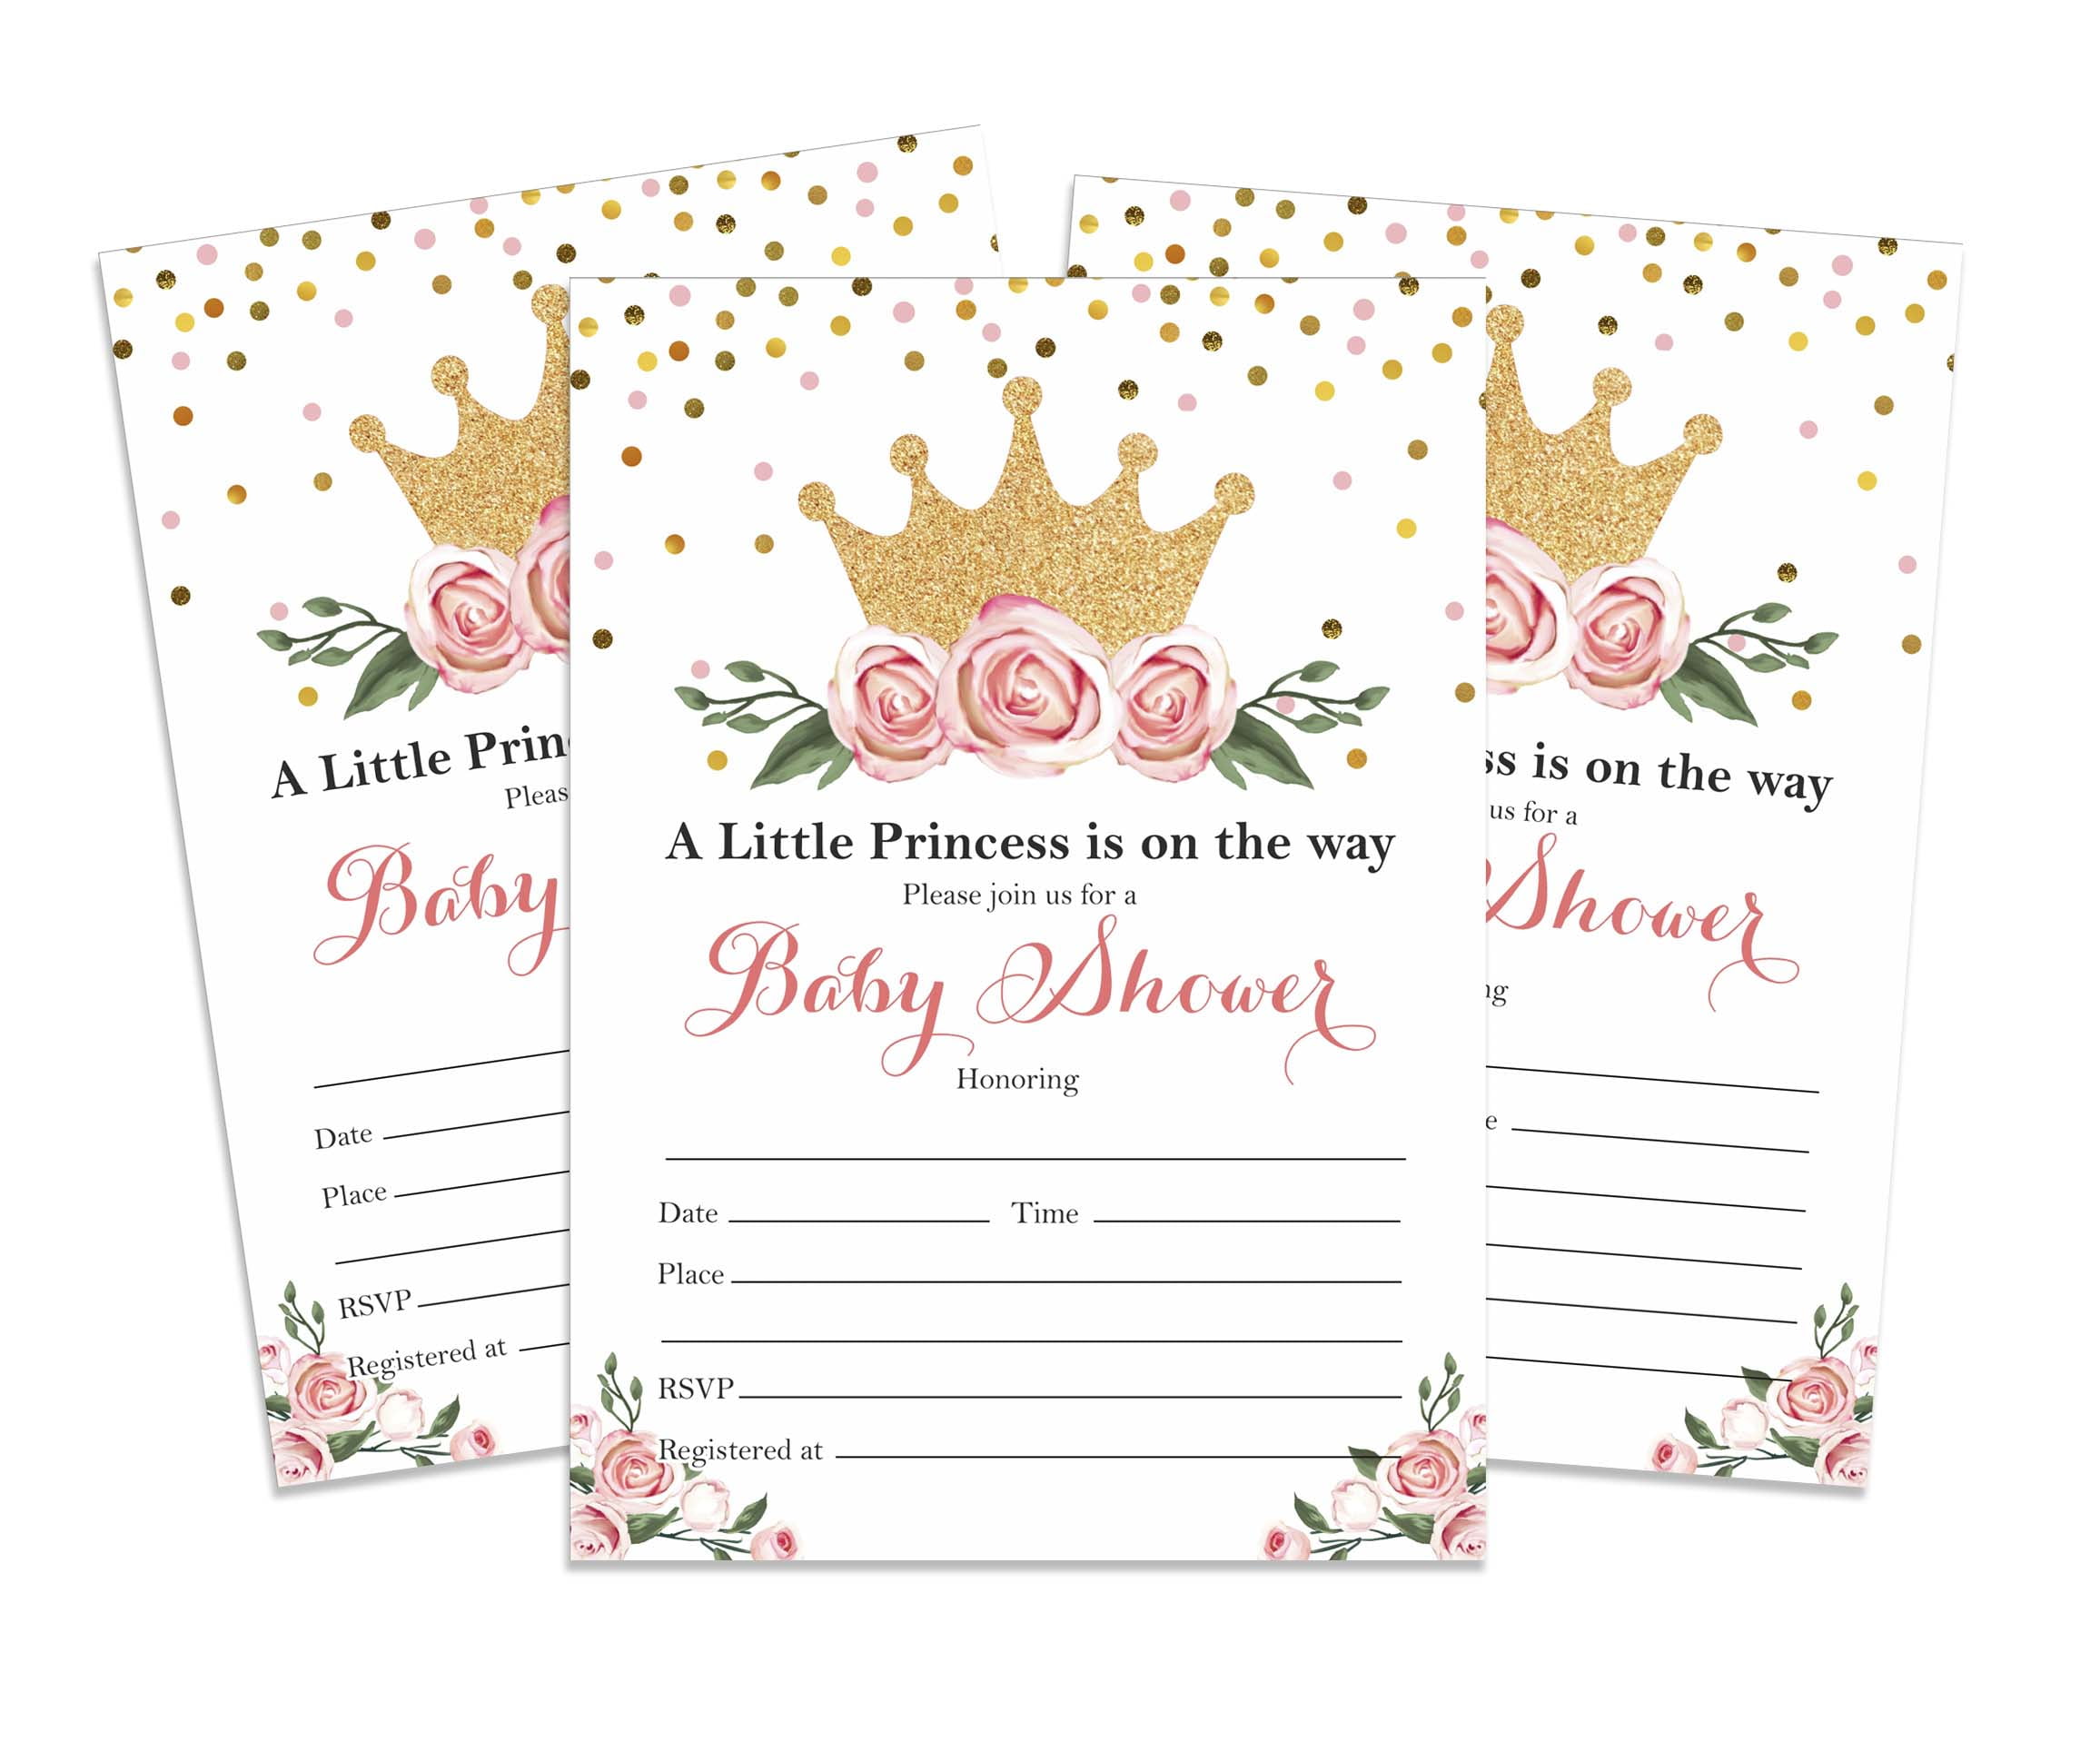 Inkdotpot Pack Of 30 Baby Shower Invites, BBQ Party Invitations, Fill In  Blank Invitations With Envelopes 5 x 7 inches